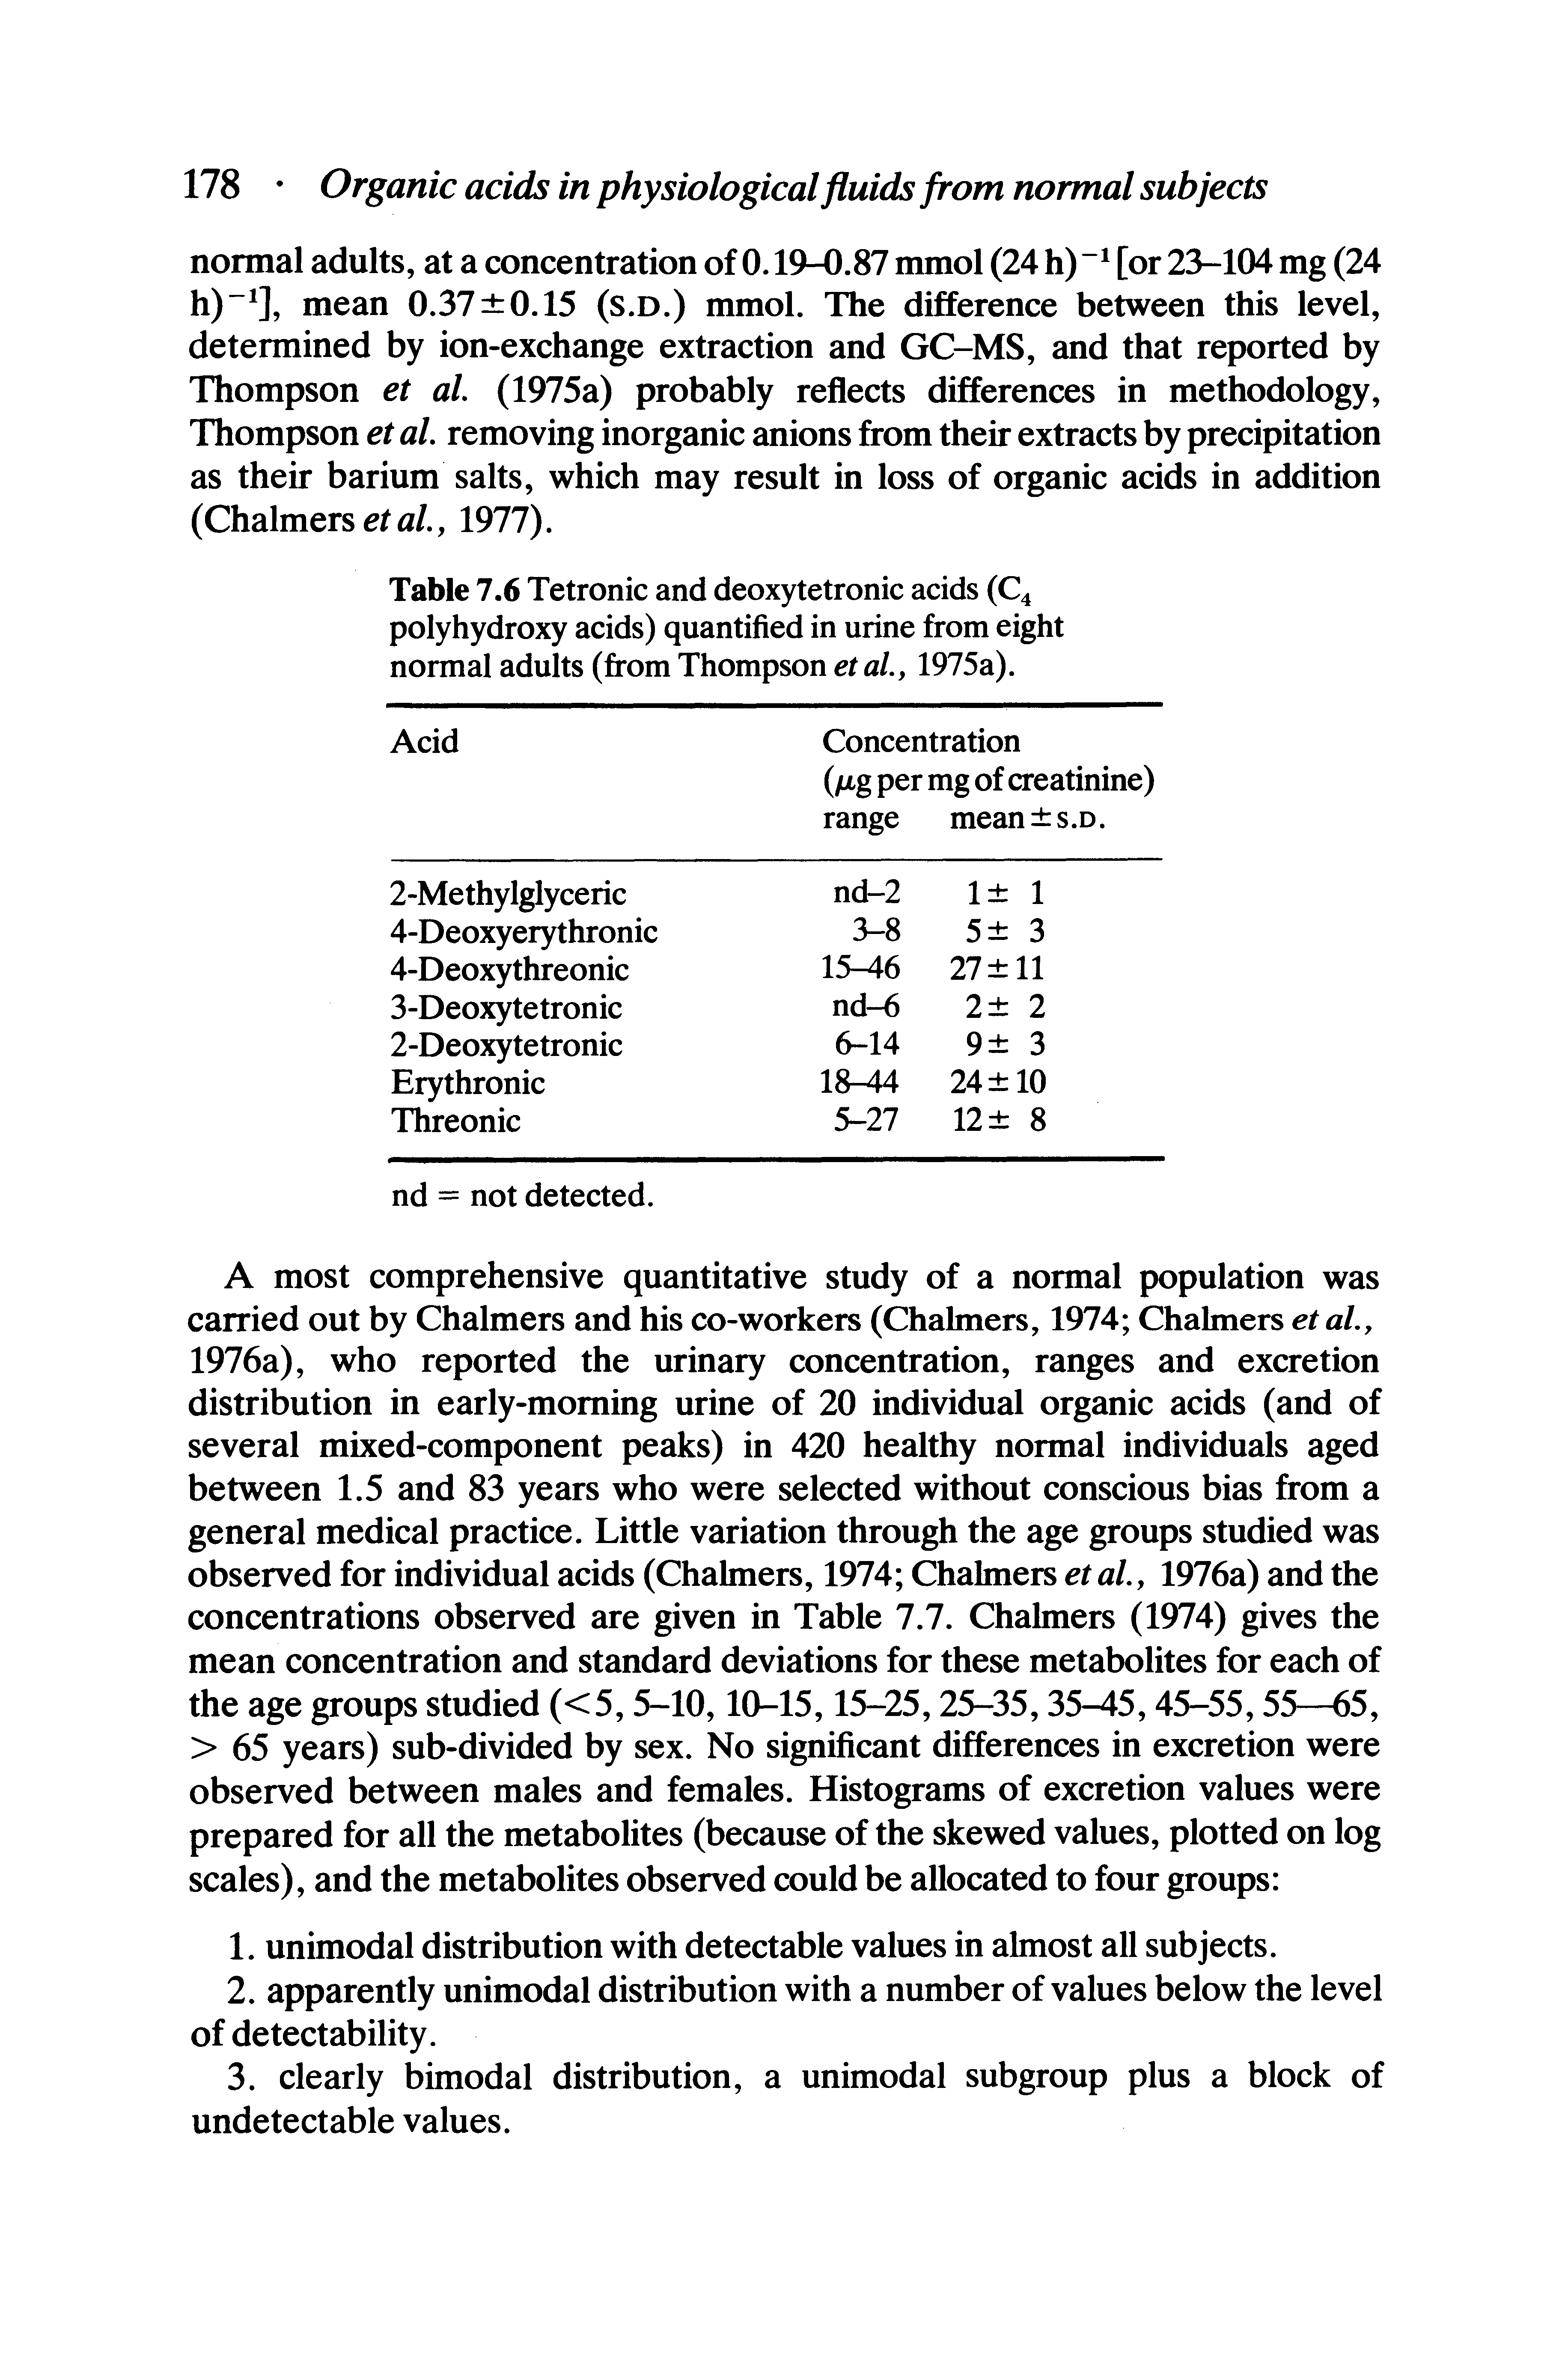 Table 7.6 Tetronic and deoxytetronic acids (C4 polyhydroxy acids) quantified in urine from eight normal adults (from Thompson etal., 1975a).